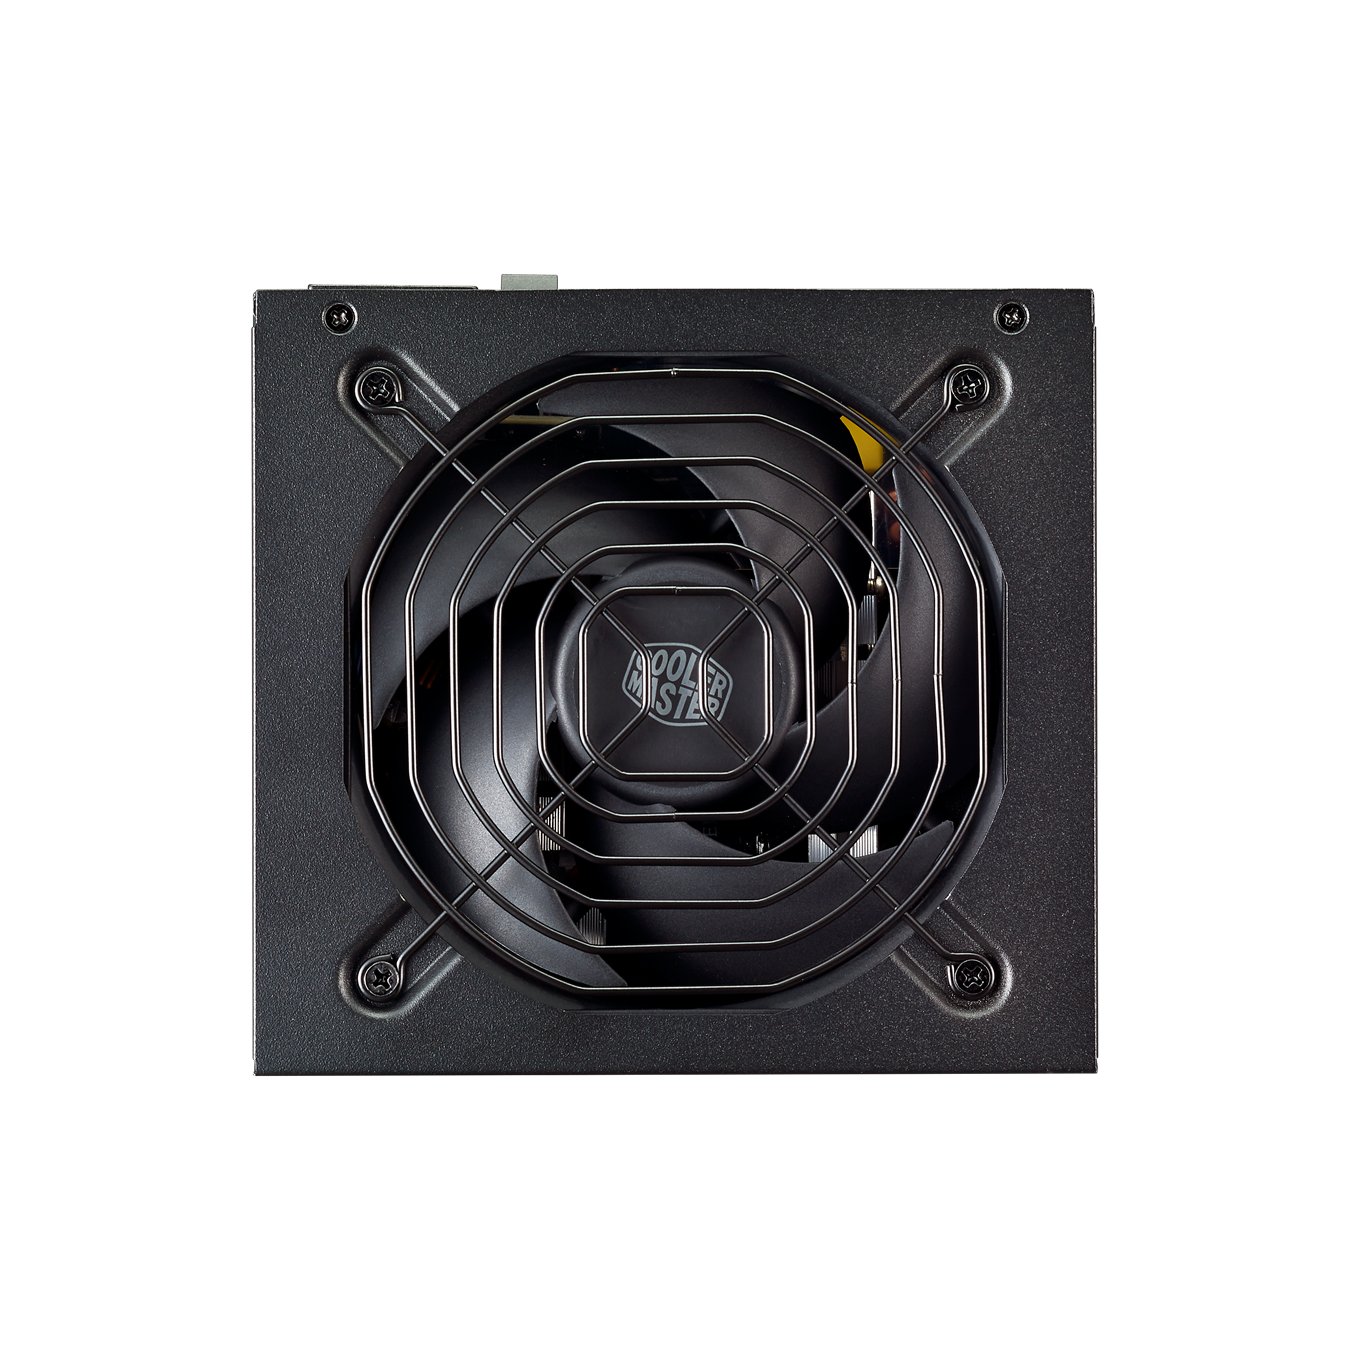 MWE Bronze 650 - Cooler Master 120mm Silencio FP fan combines sealed LDB bearings with quiet fan blades offering a long lifetime of quiet cooling.